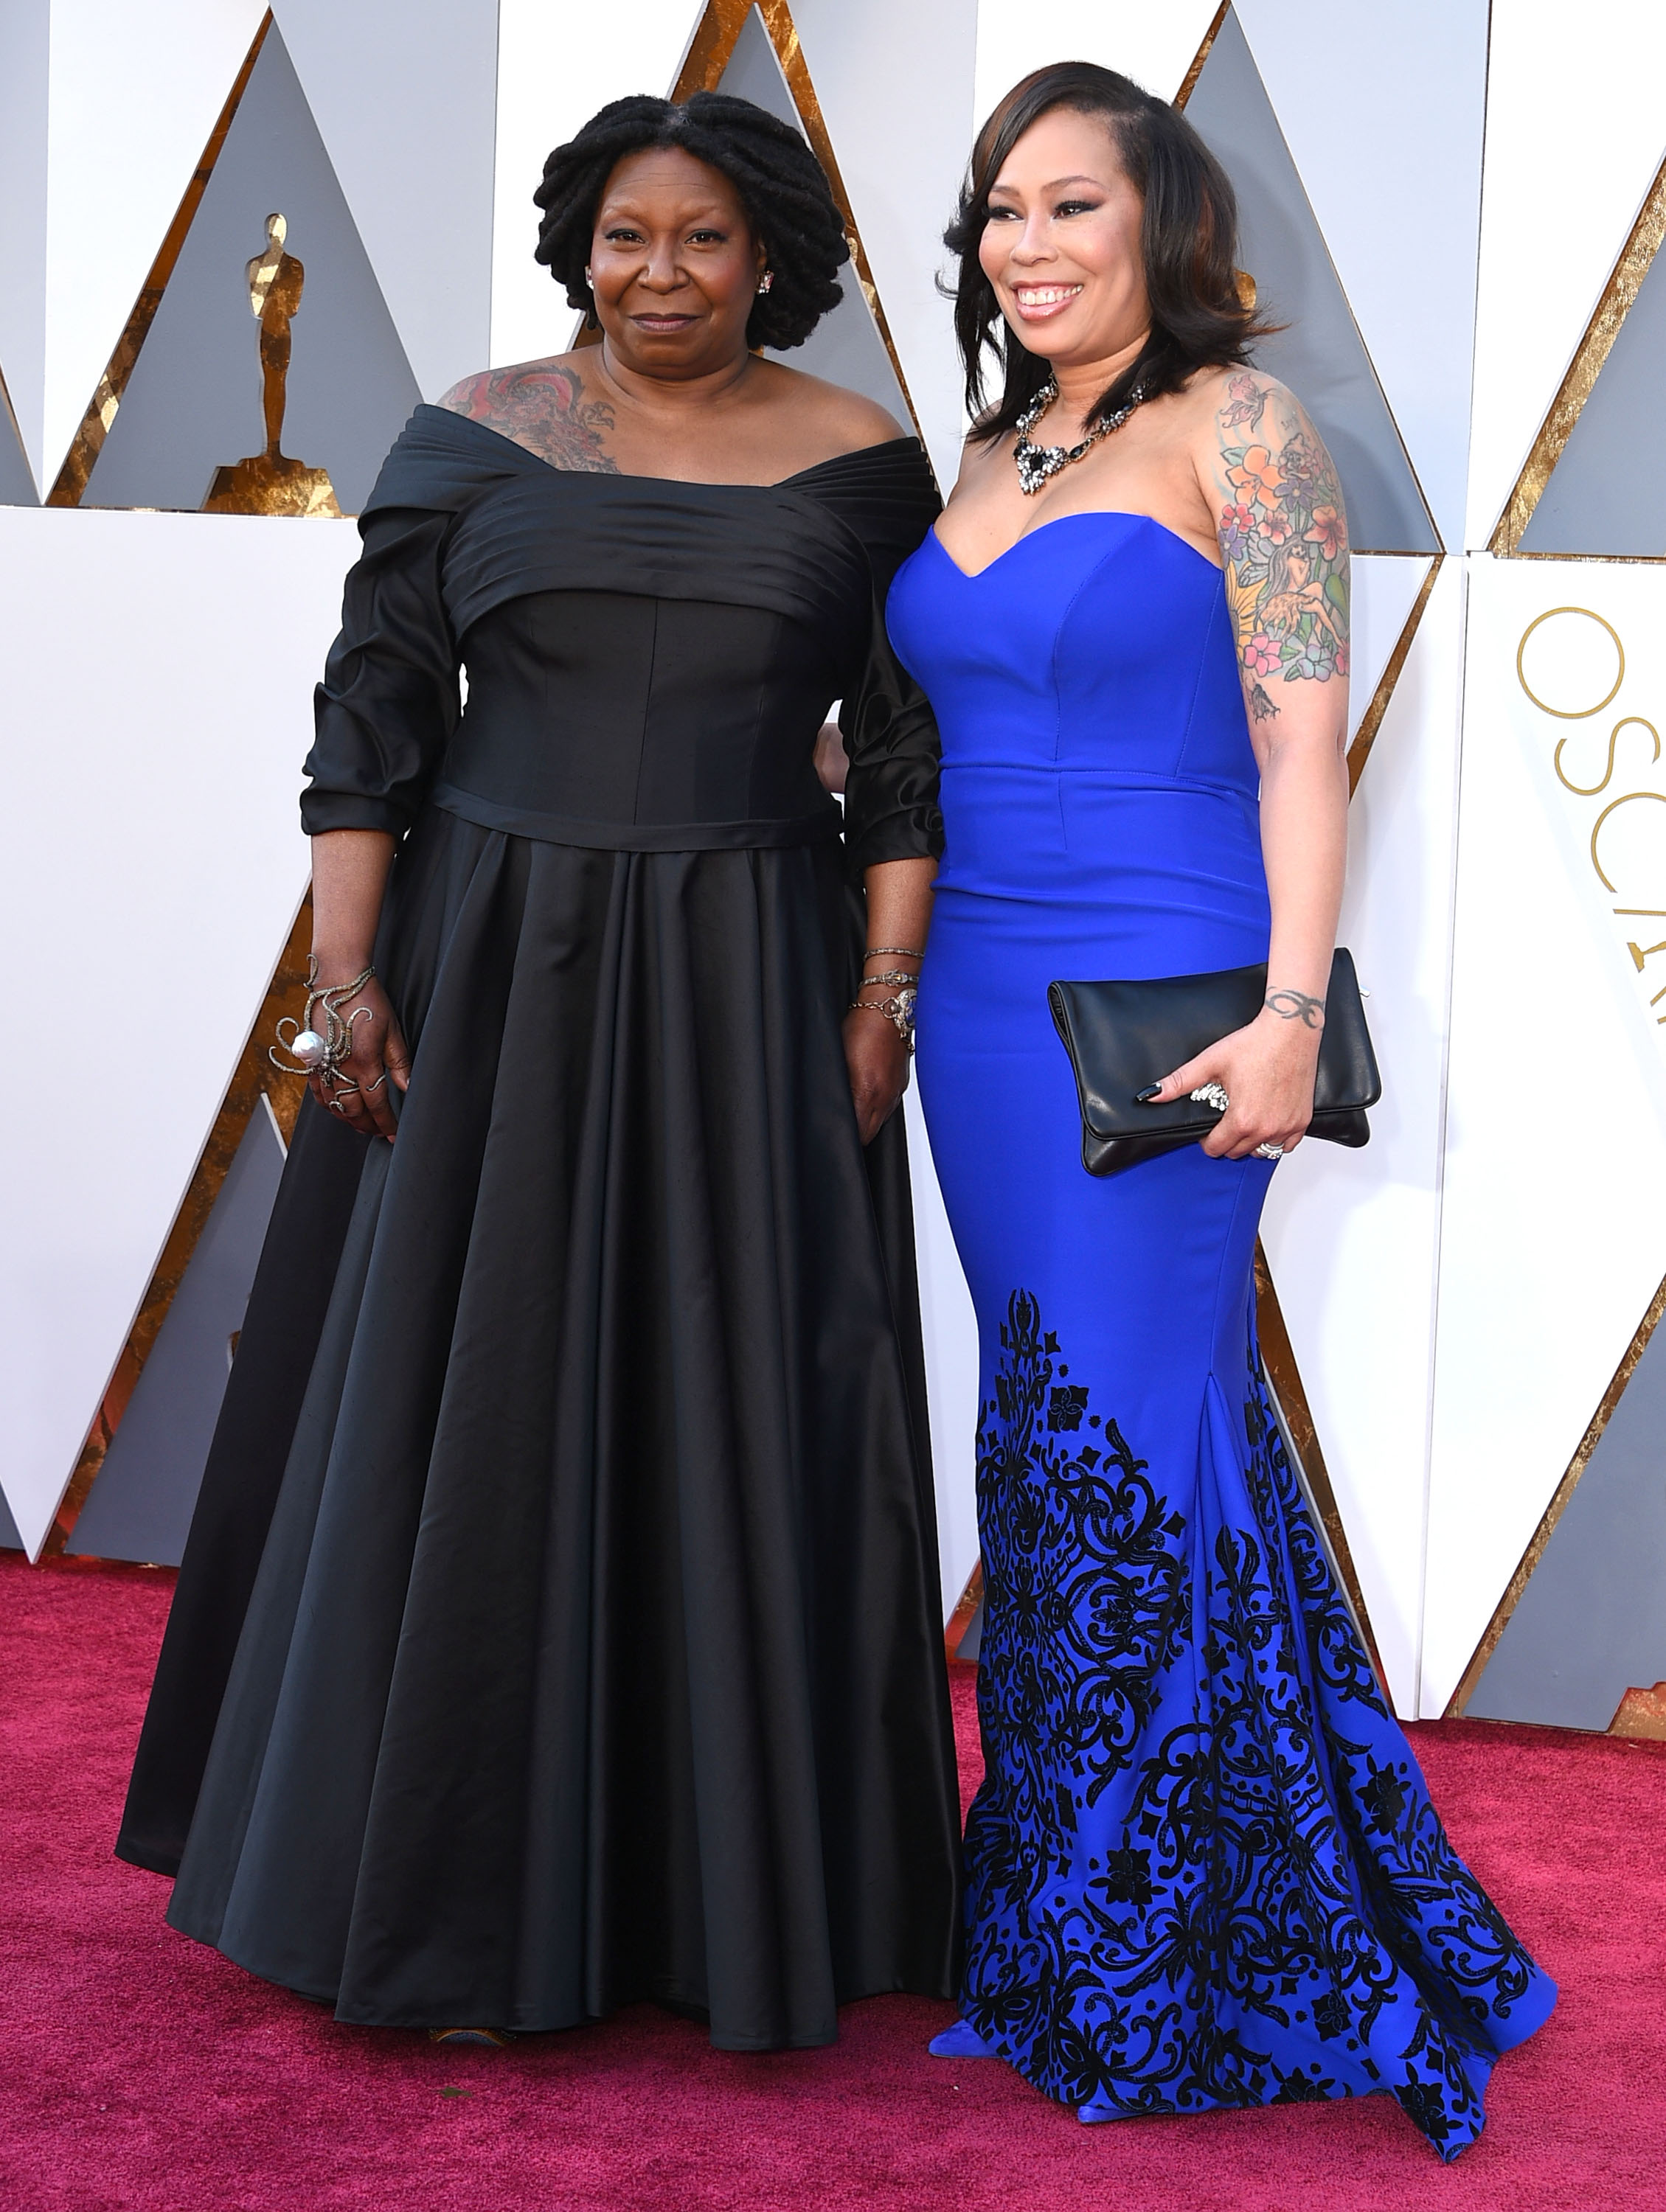 Whoopi Goldberg and Alex Martin at the 88th Annual Academy Awards in Hollywood, 2016 | Source: Getty Images